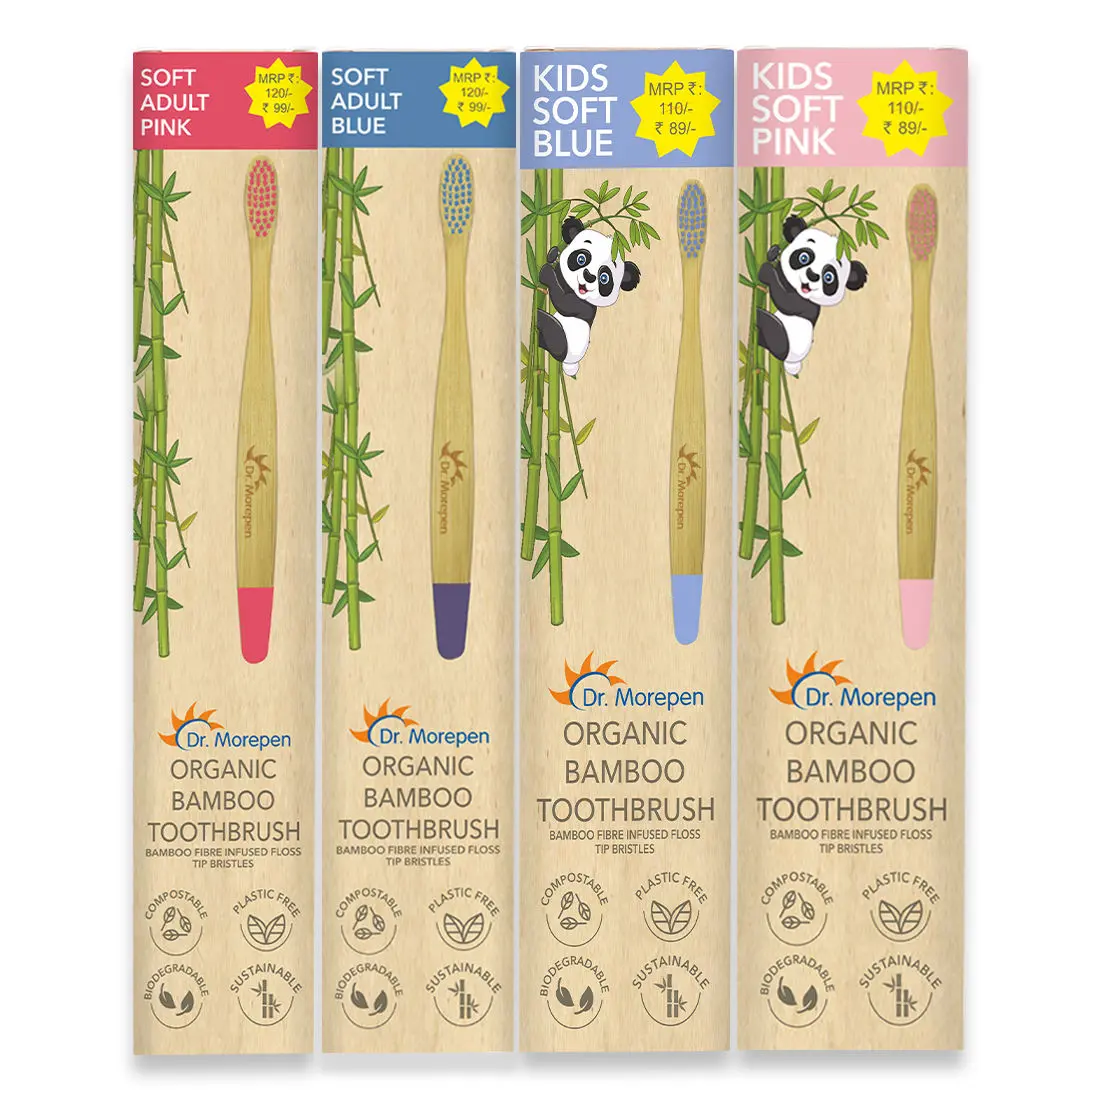 DR. MOREPEN Organic Bamboo Toothbrush Family Pack - 2 Kids & 2 Adults